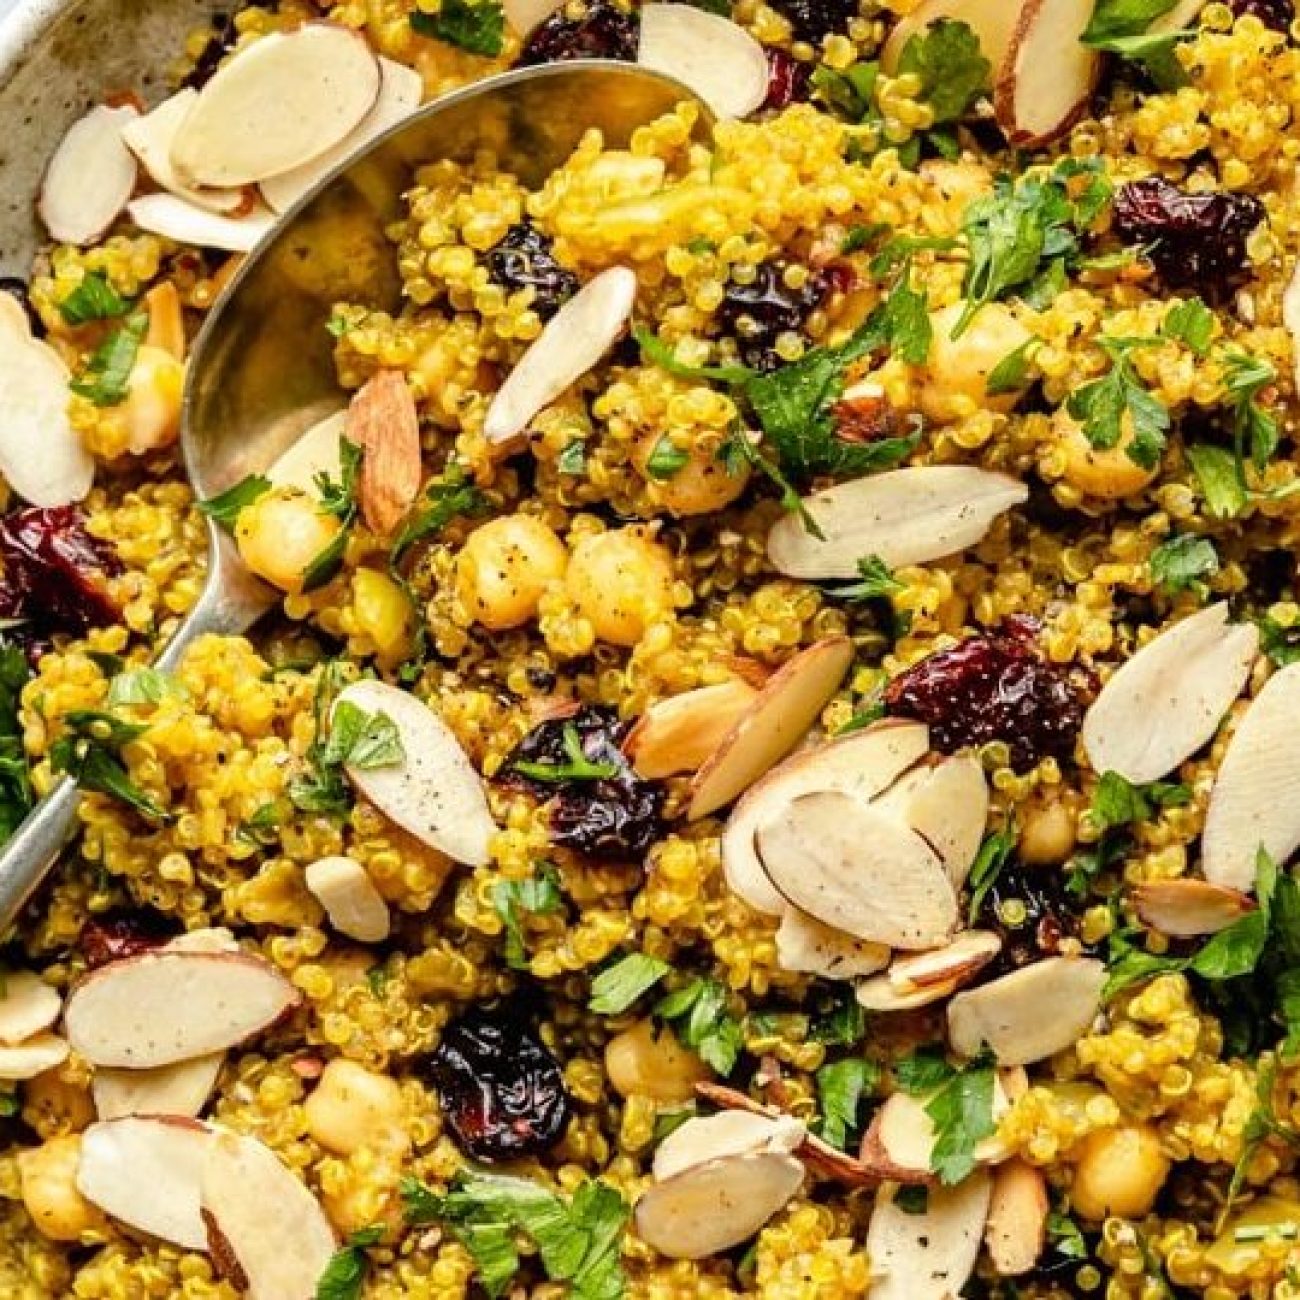 Moroccan-Inspired Aromatic Spiced Couscous Recipe